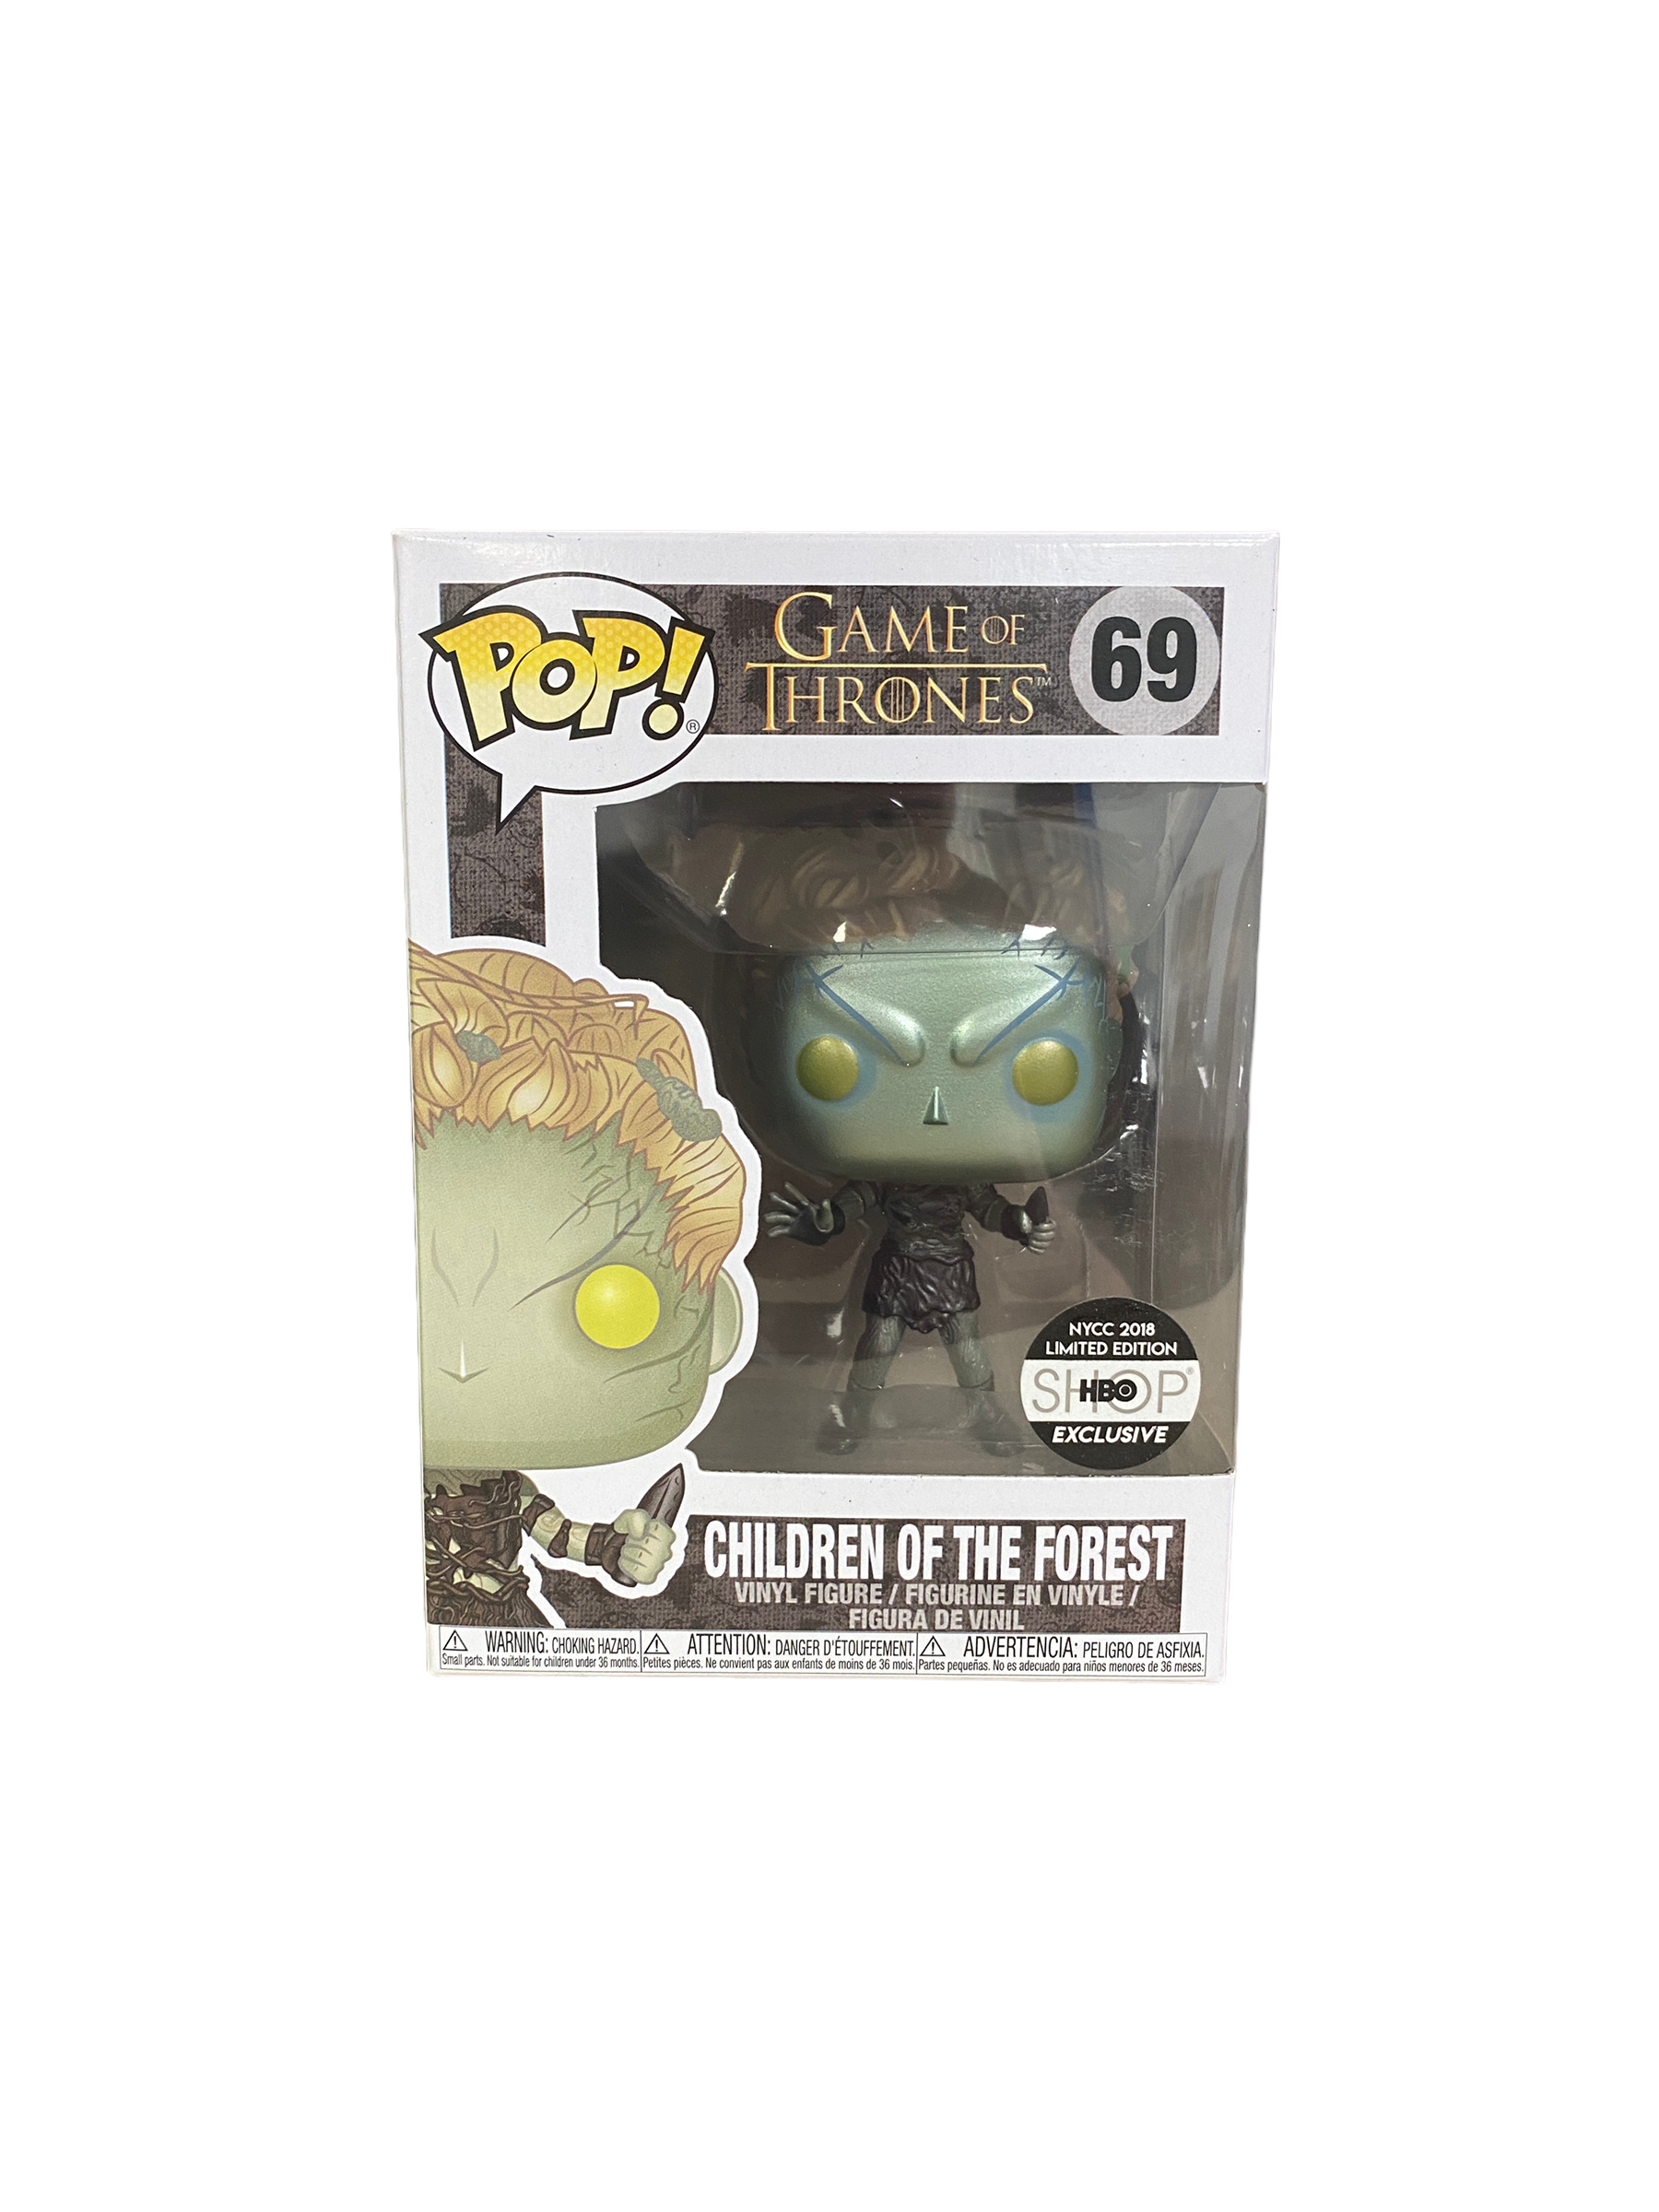 Children Of The Forest #69 (Metallic) Funko Pop! - Game Of Thrones - NYCC 2018 HBO Shop Exclusive - Condition 8.5/10